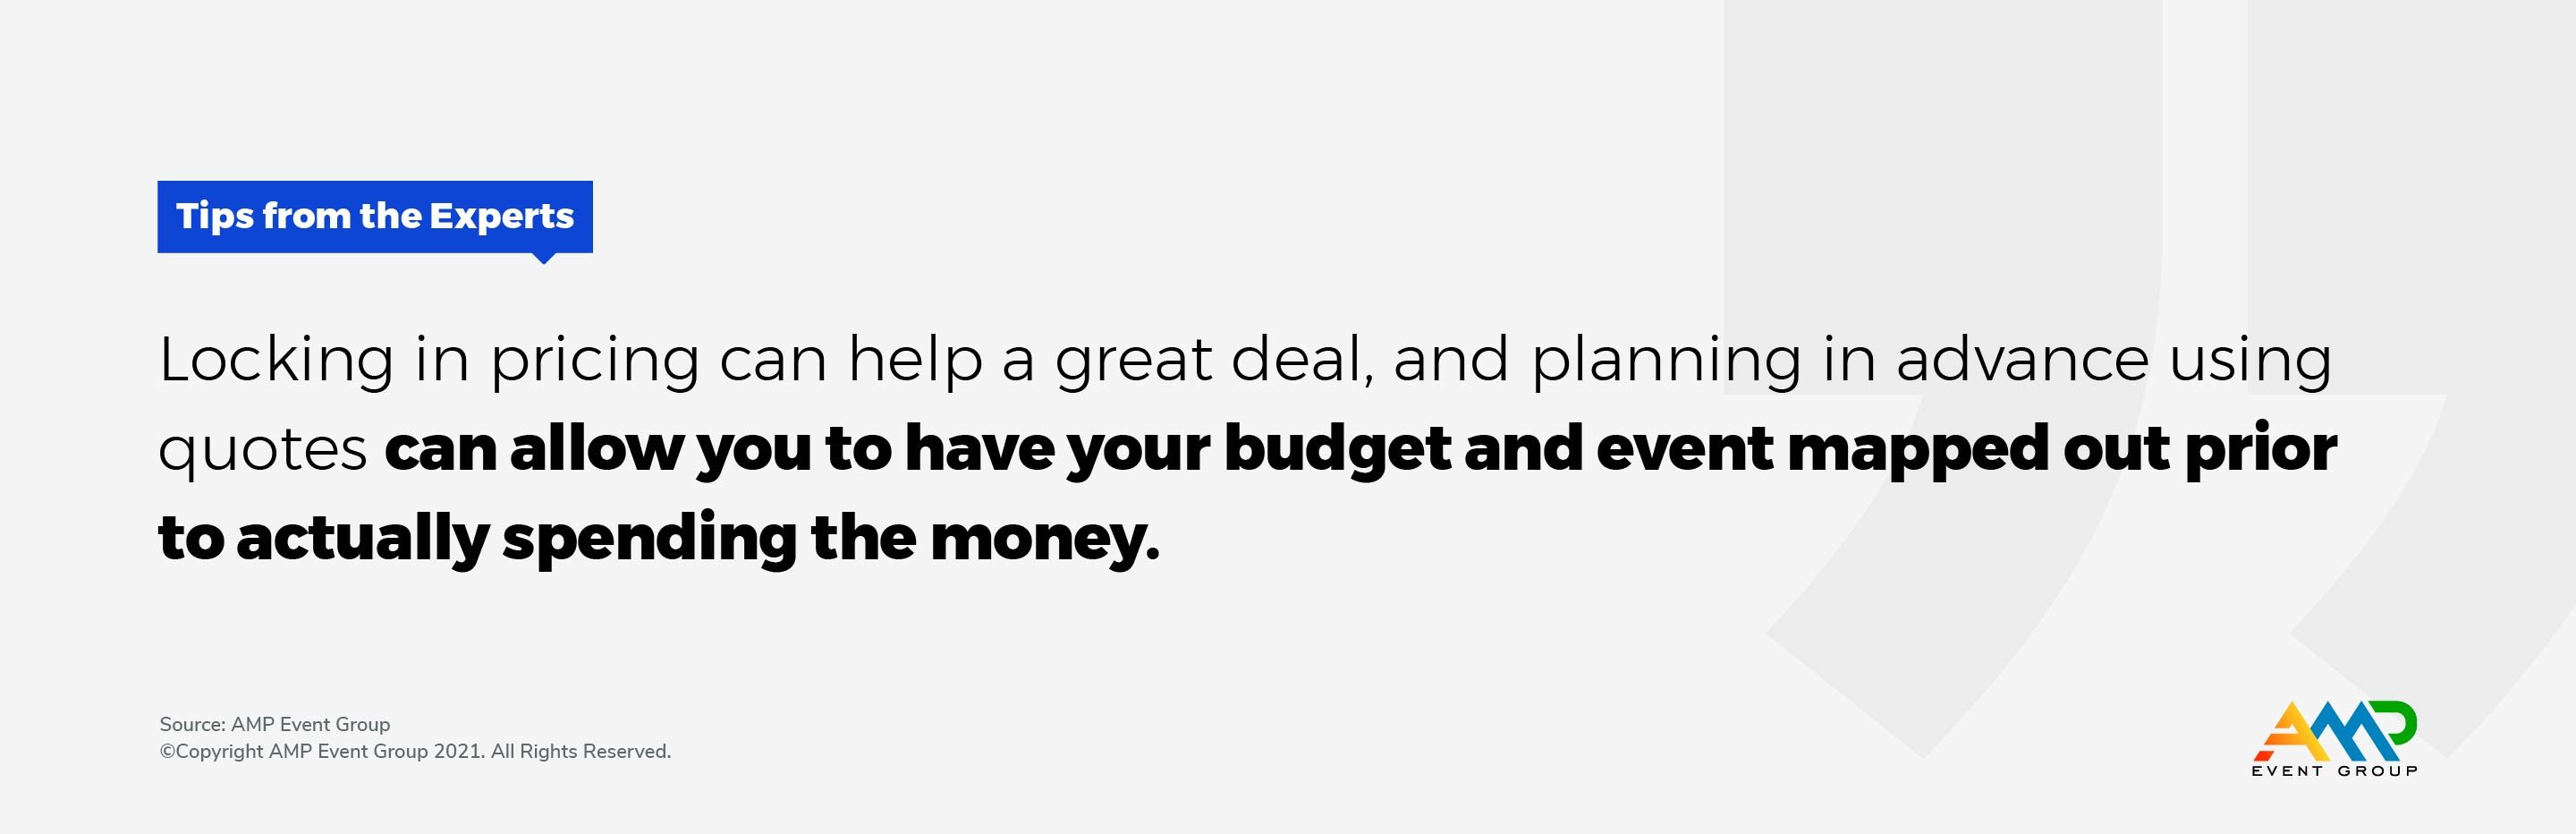 Locking in pricing can help a great deal, and planning in advance using quotes can allow you to have your budget and event mapped out prior to actually spending the money. 